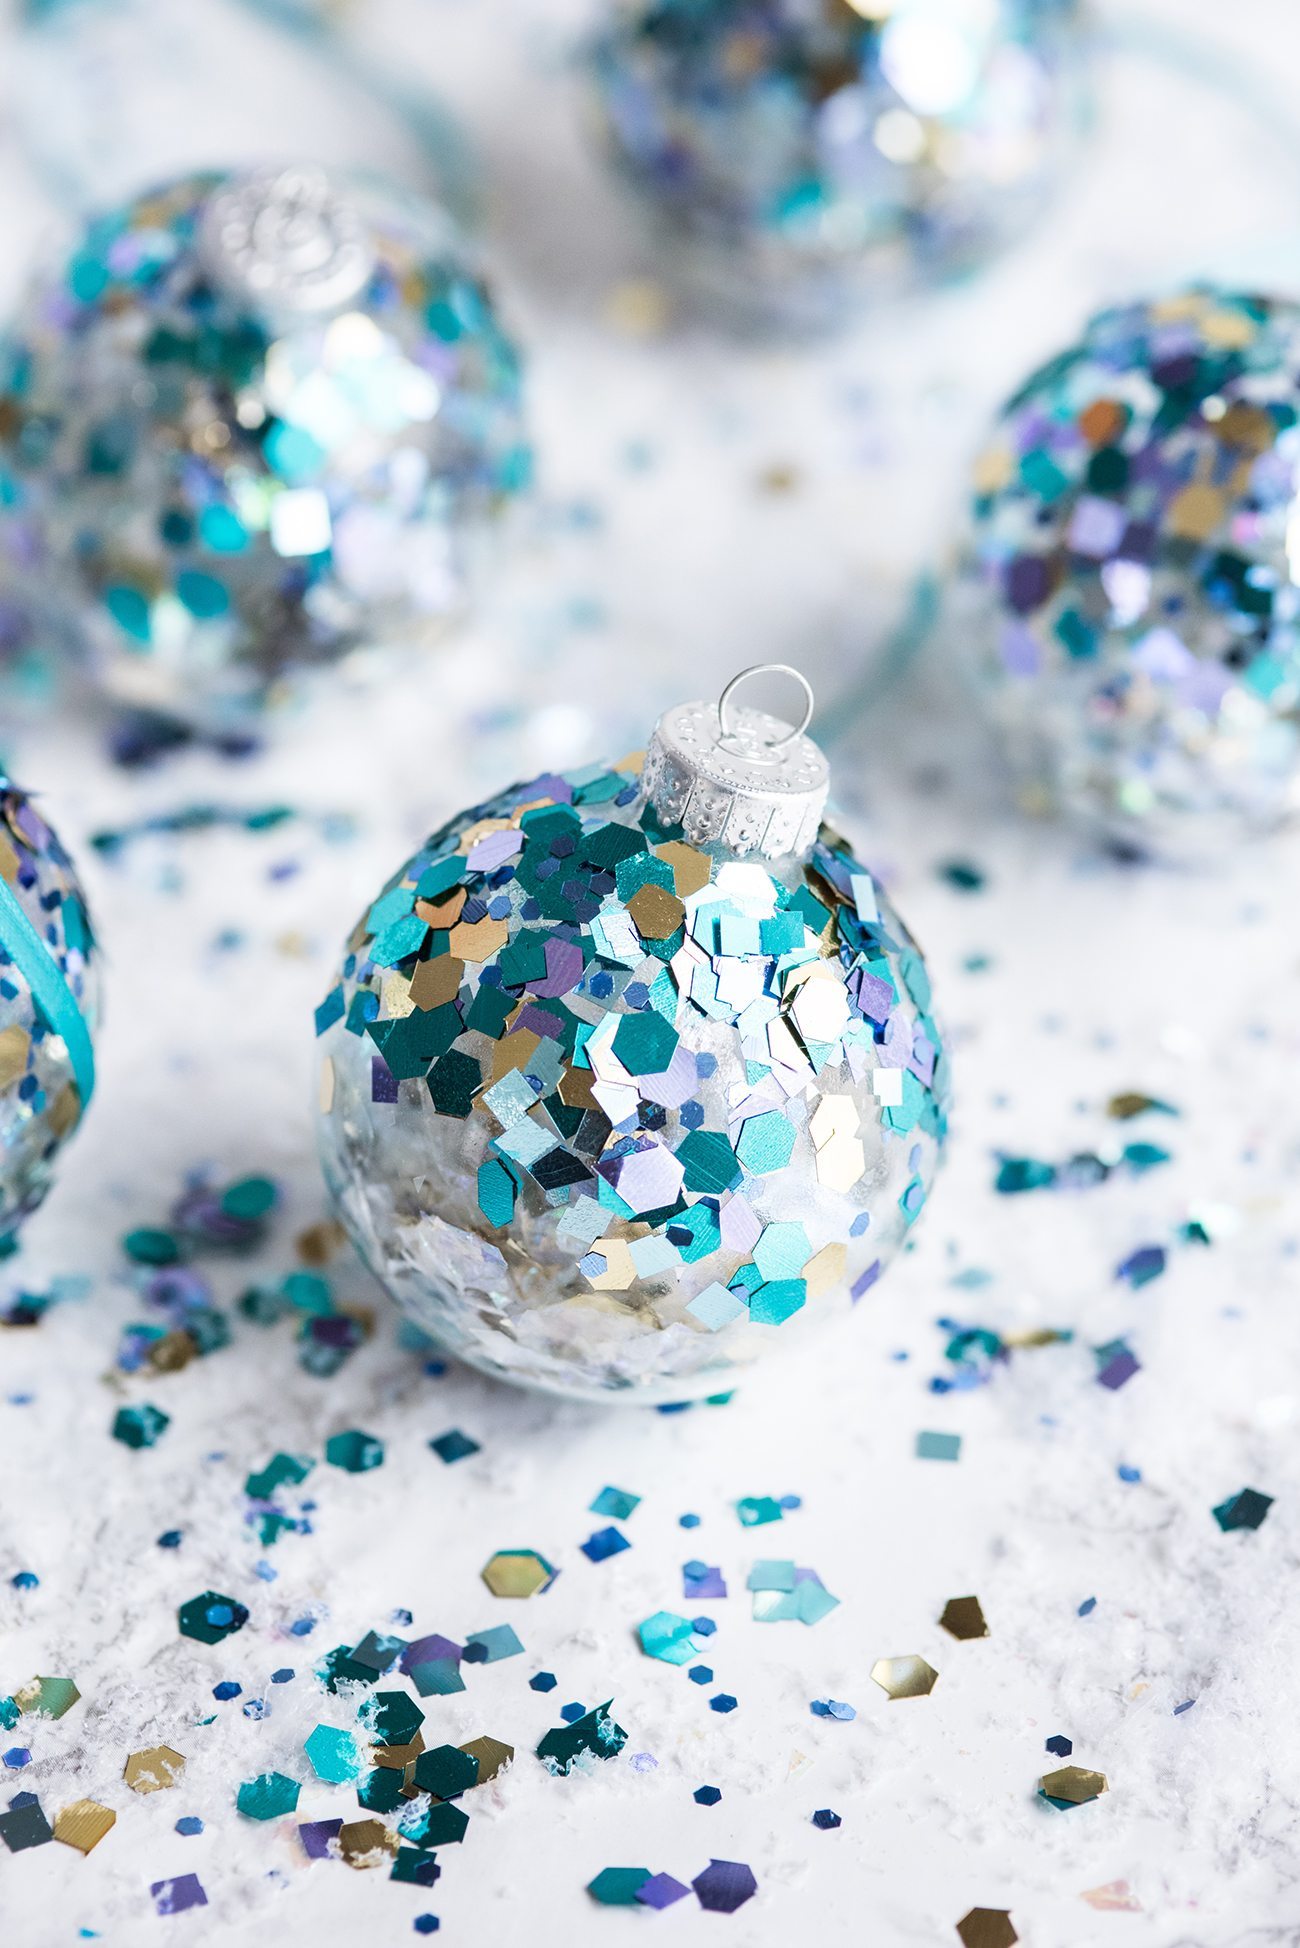 10 Gorgeous Homemade Ornaments You Can Make with Simple Glass Ornaments